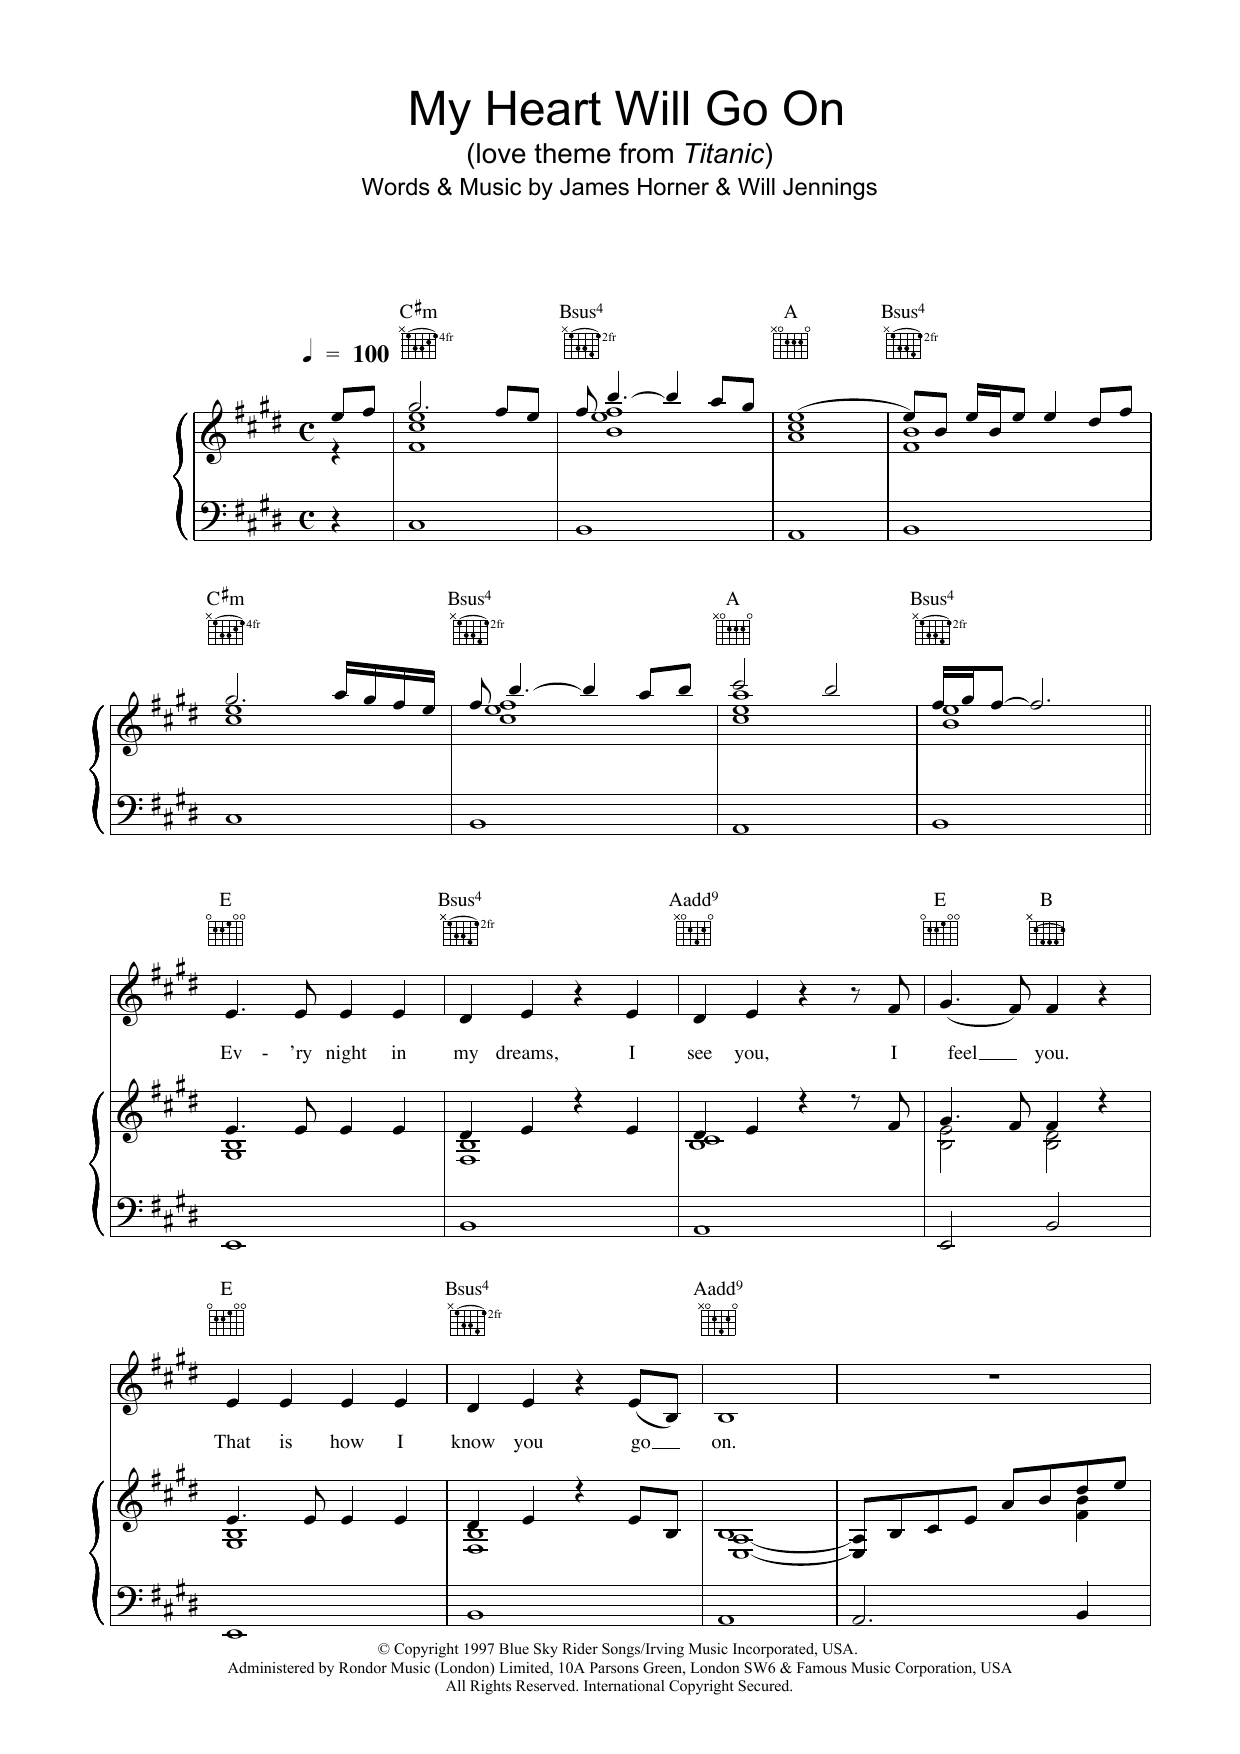 Celine Dion My Heart Will Go On (Love Theme from Titanic) sheet music notes printable PDF score